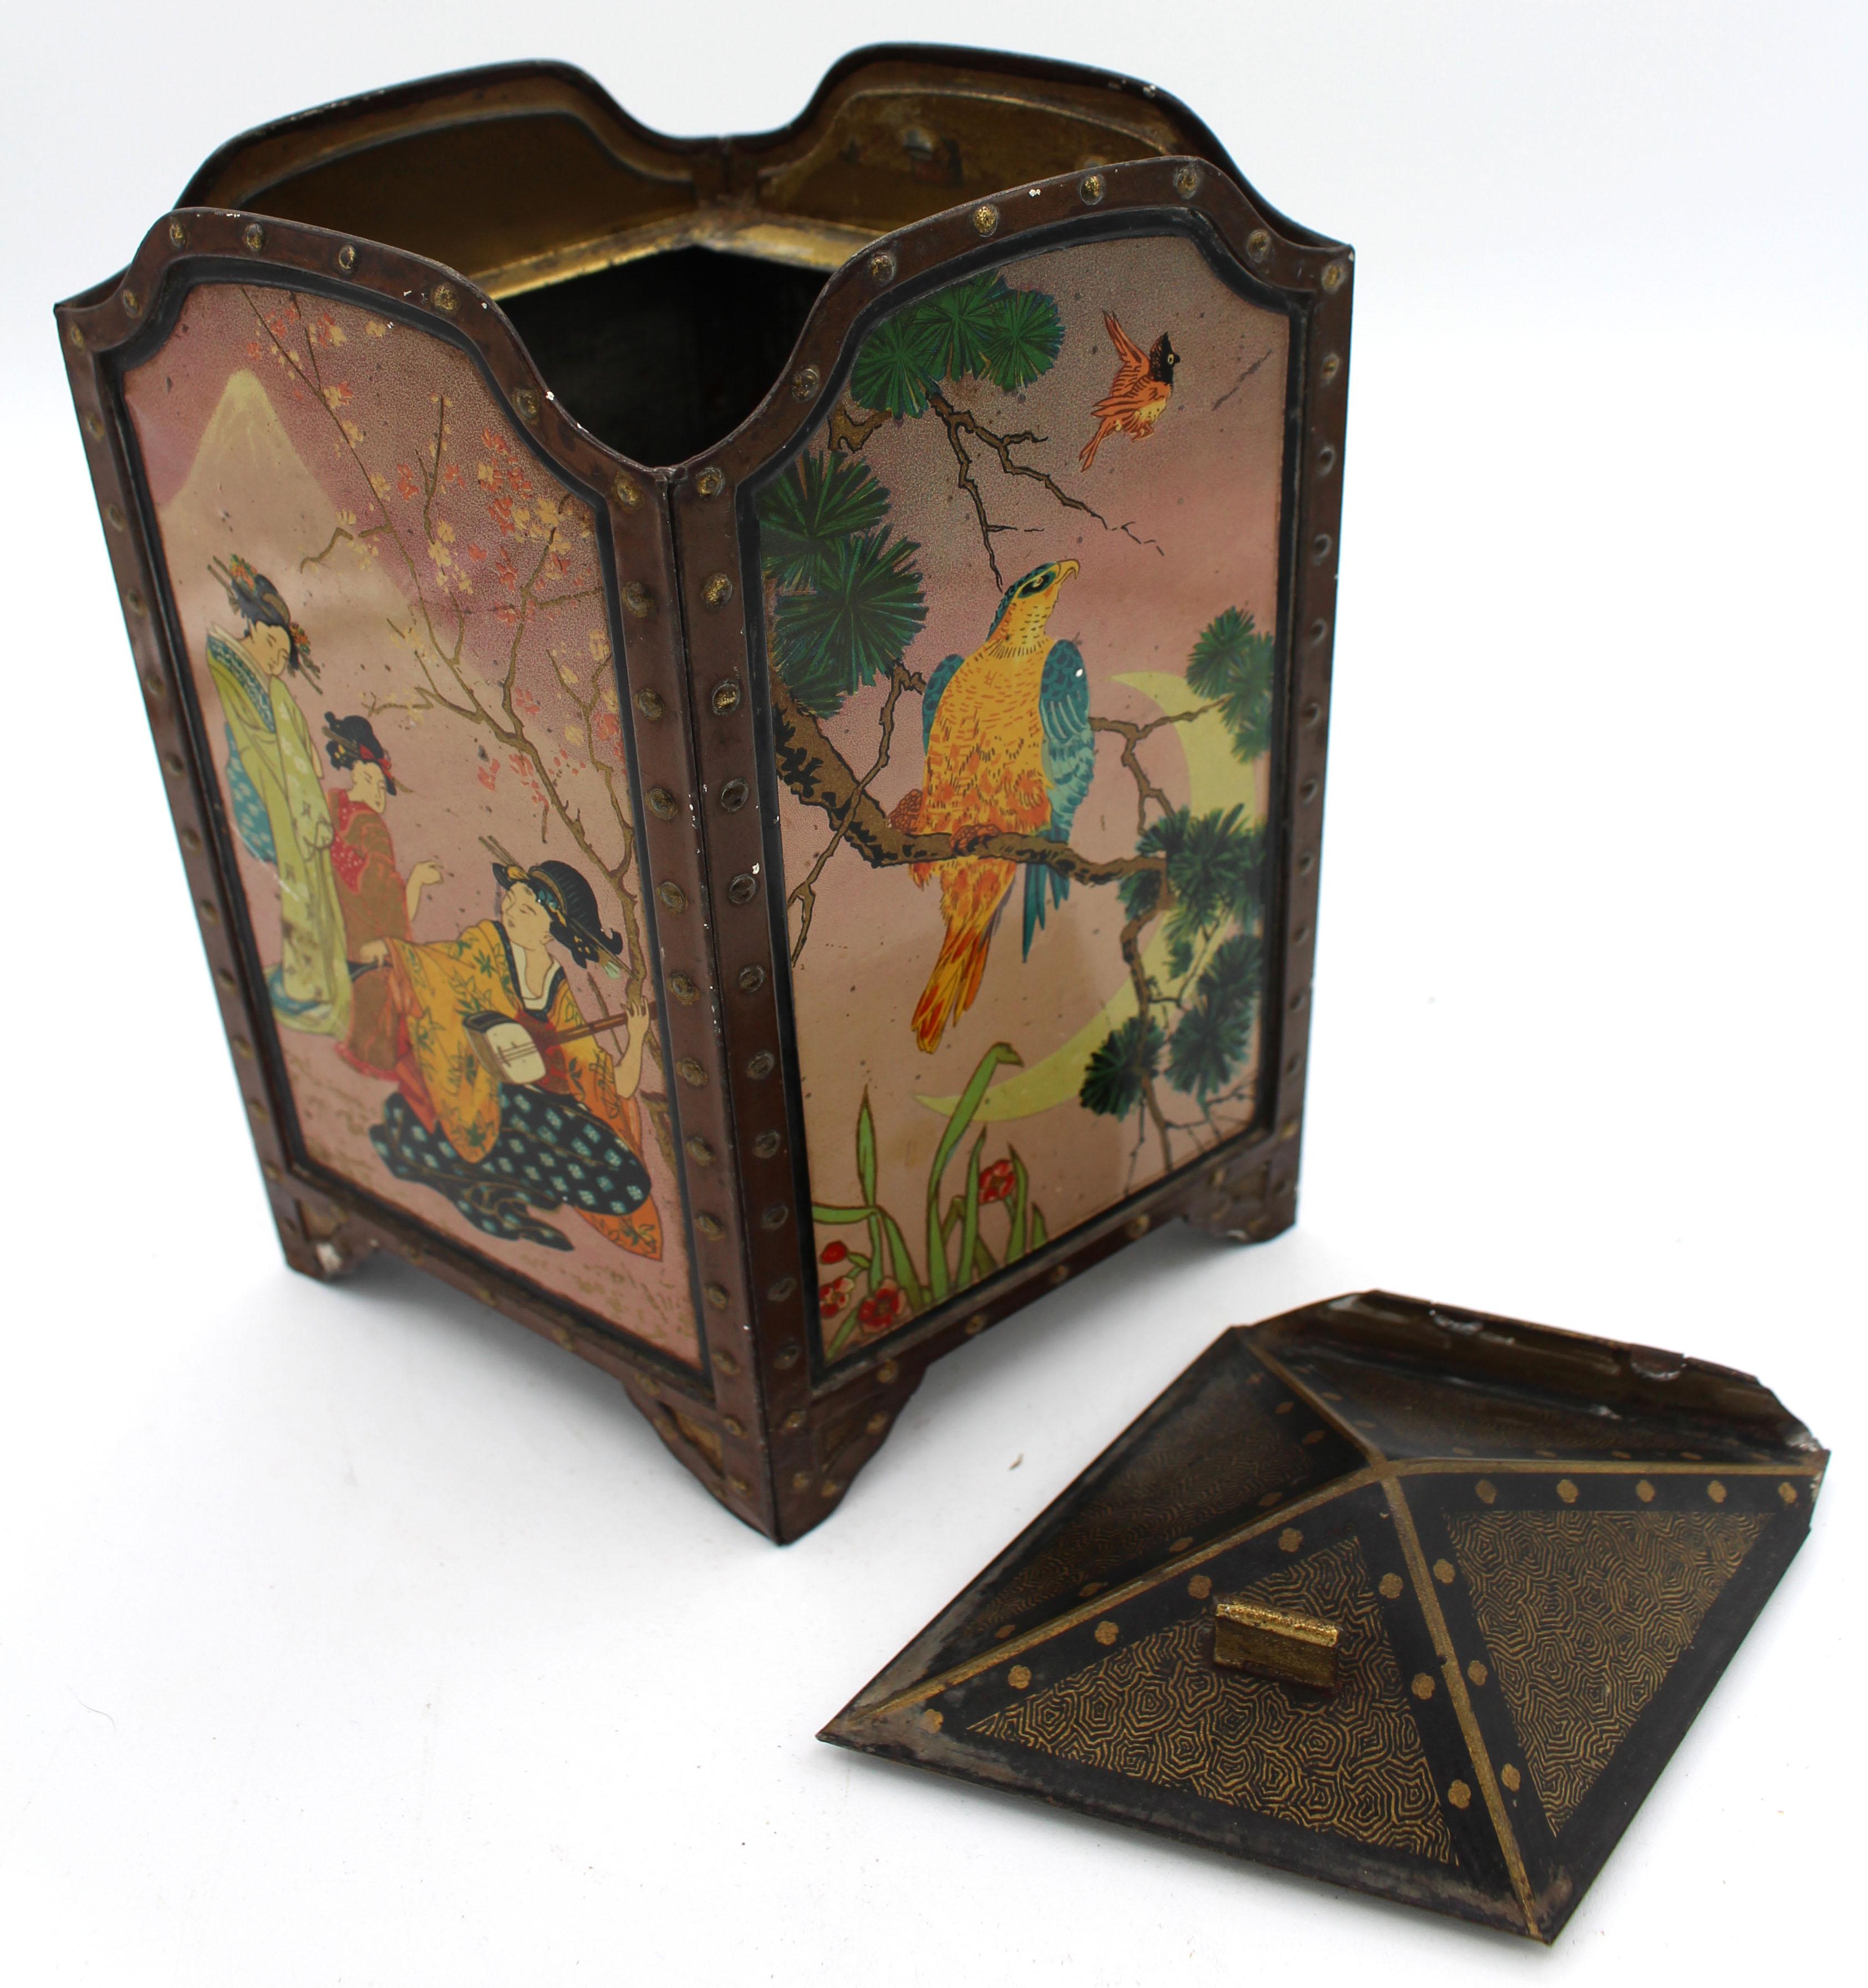 1913 Huntley & Palmers Japanese screen form biscuit tin box. Aesthetic Movement design 4-panel screen complete with faux leather trim - each panel well decorated. Regd No. 611071. Stamped inside lid. Lid detached, various scuffs particularly to the